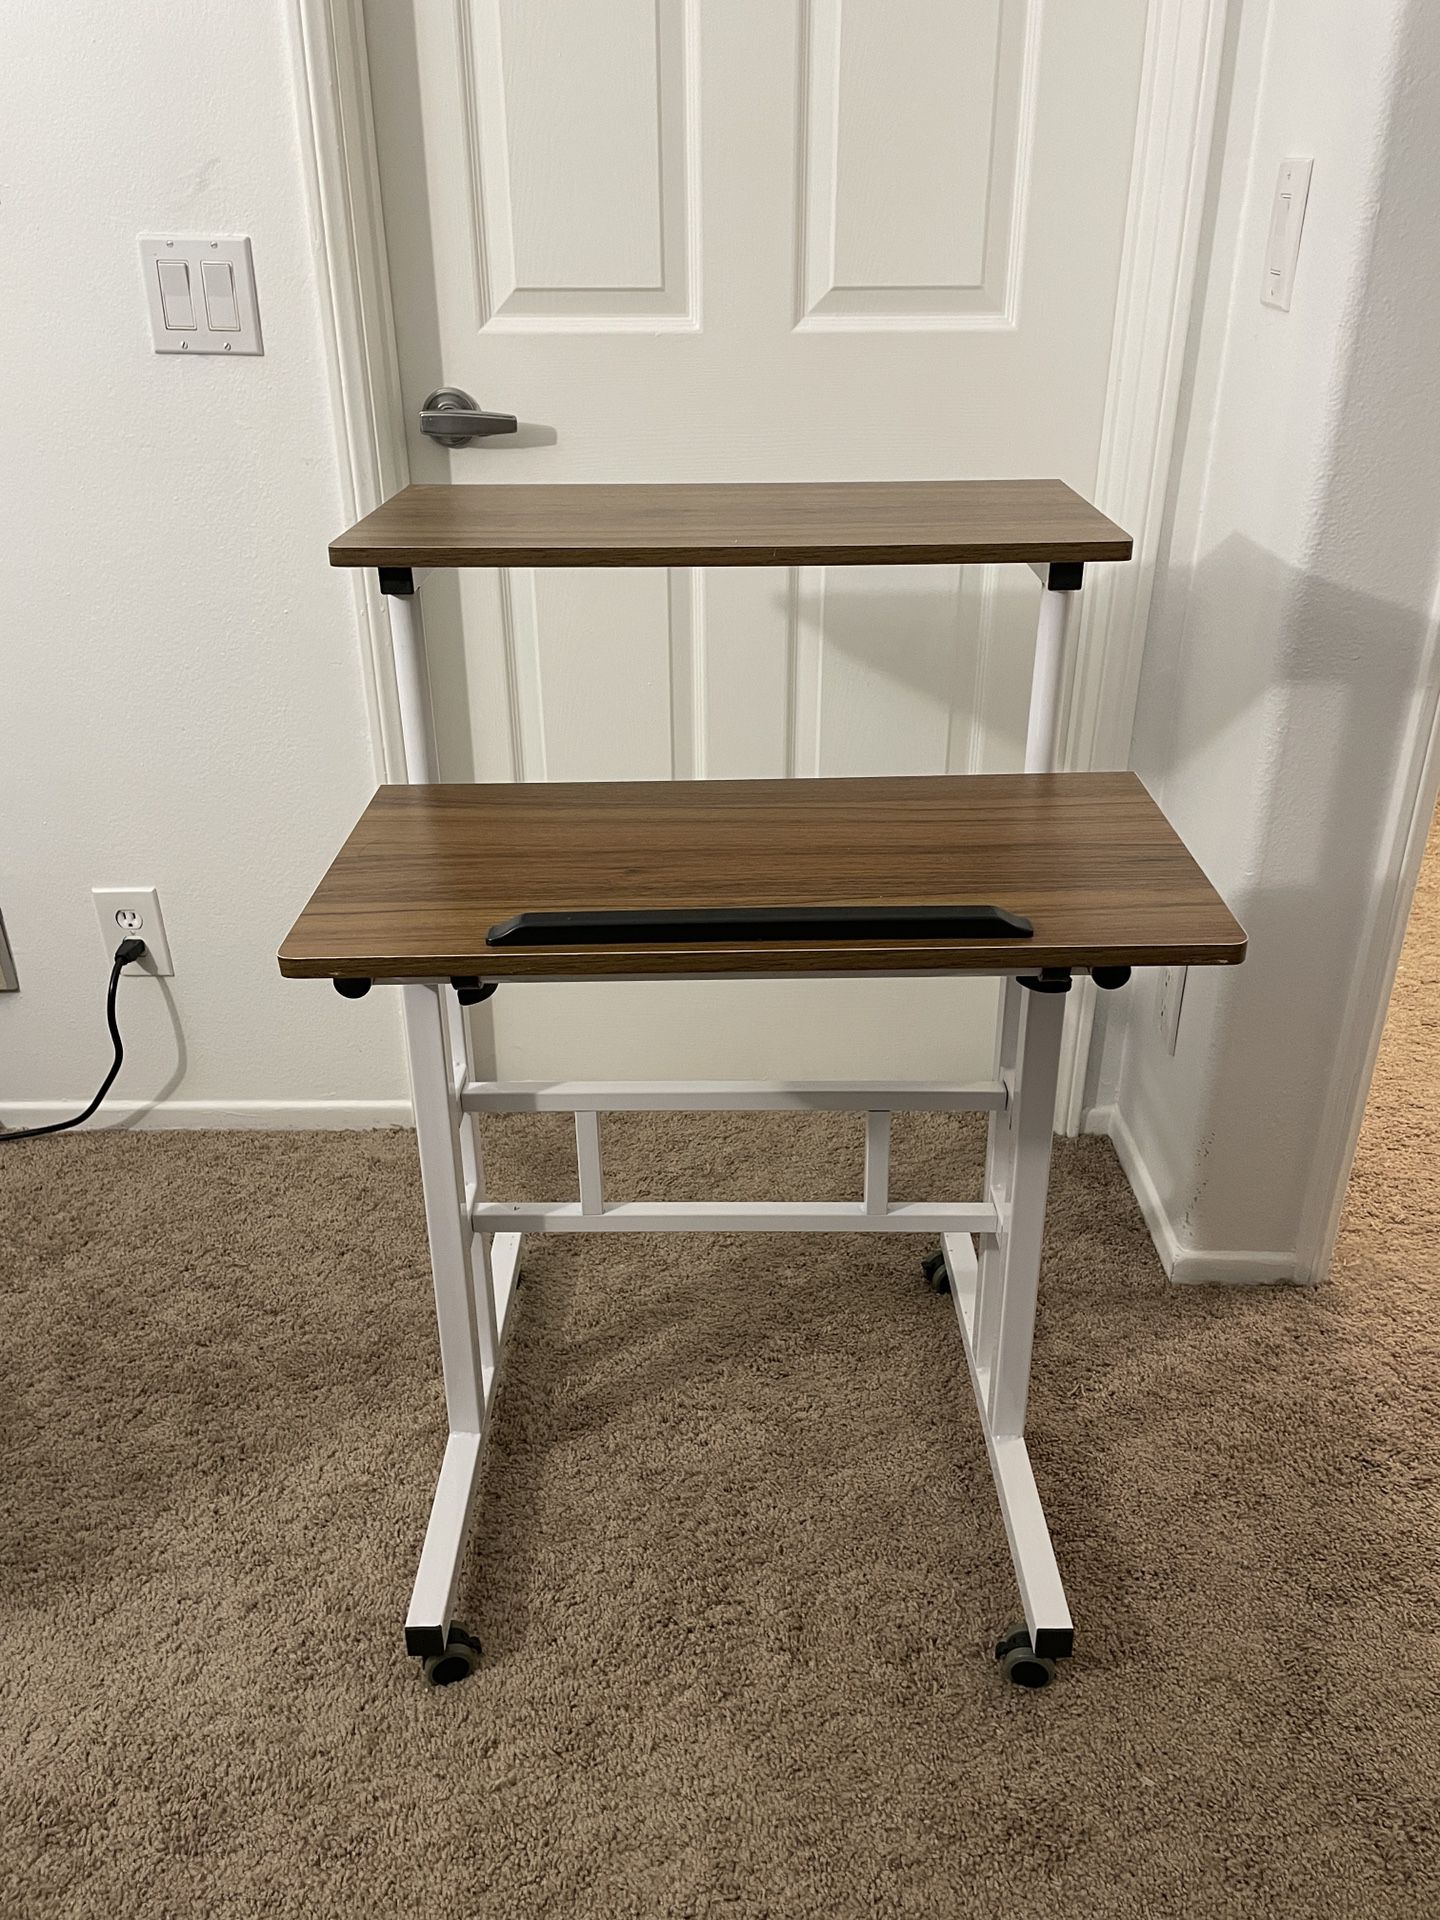 Confvertible Sitting/ Standing Desk with Wheels